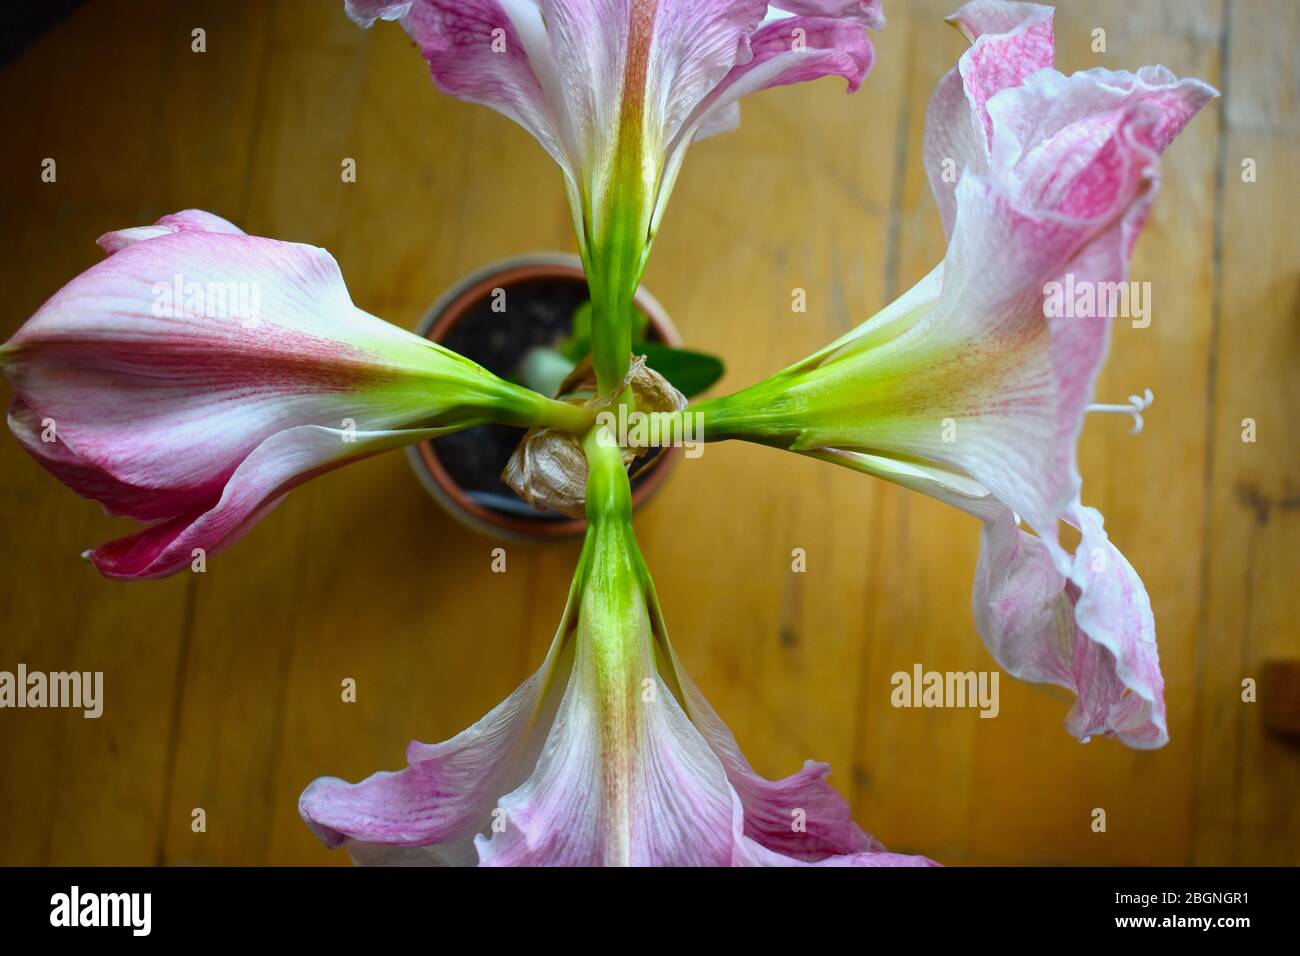 Amaryllis blossom from above Indoor bulbous plant with broad flower three inner petals and same number outer sepals Hollow stem has narrow flat leaves Stock Photo